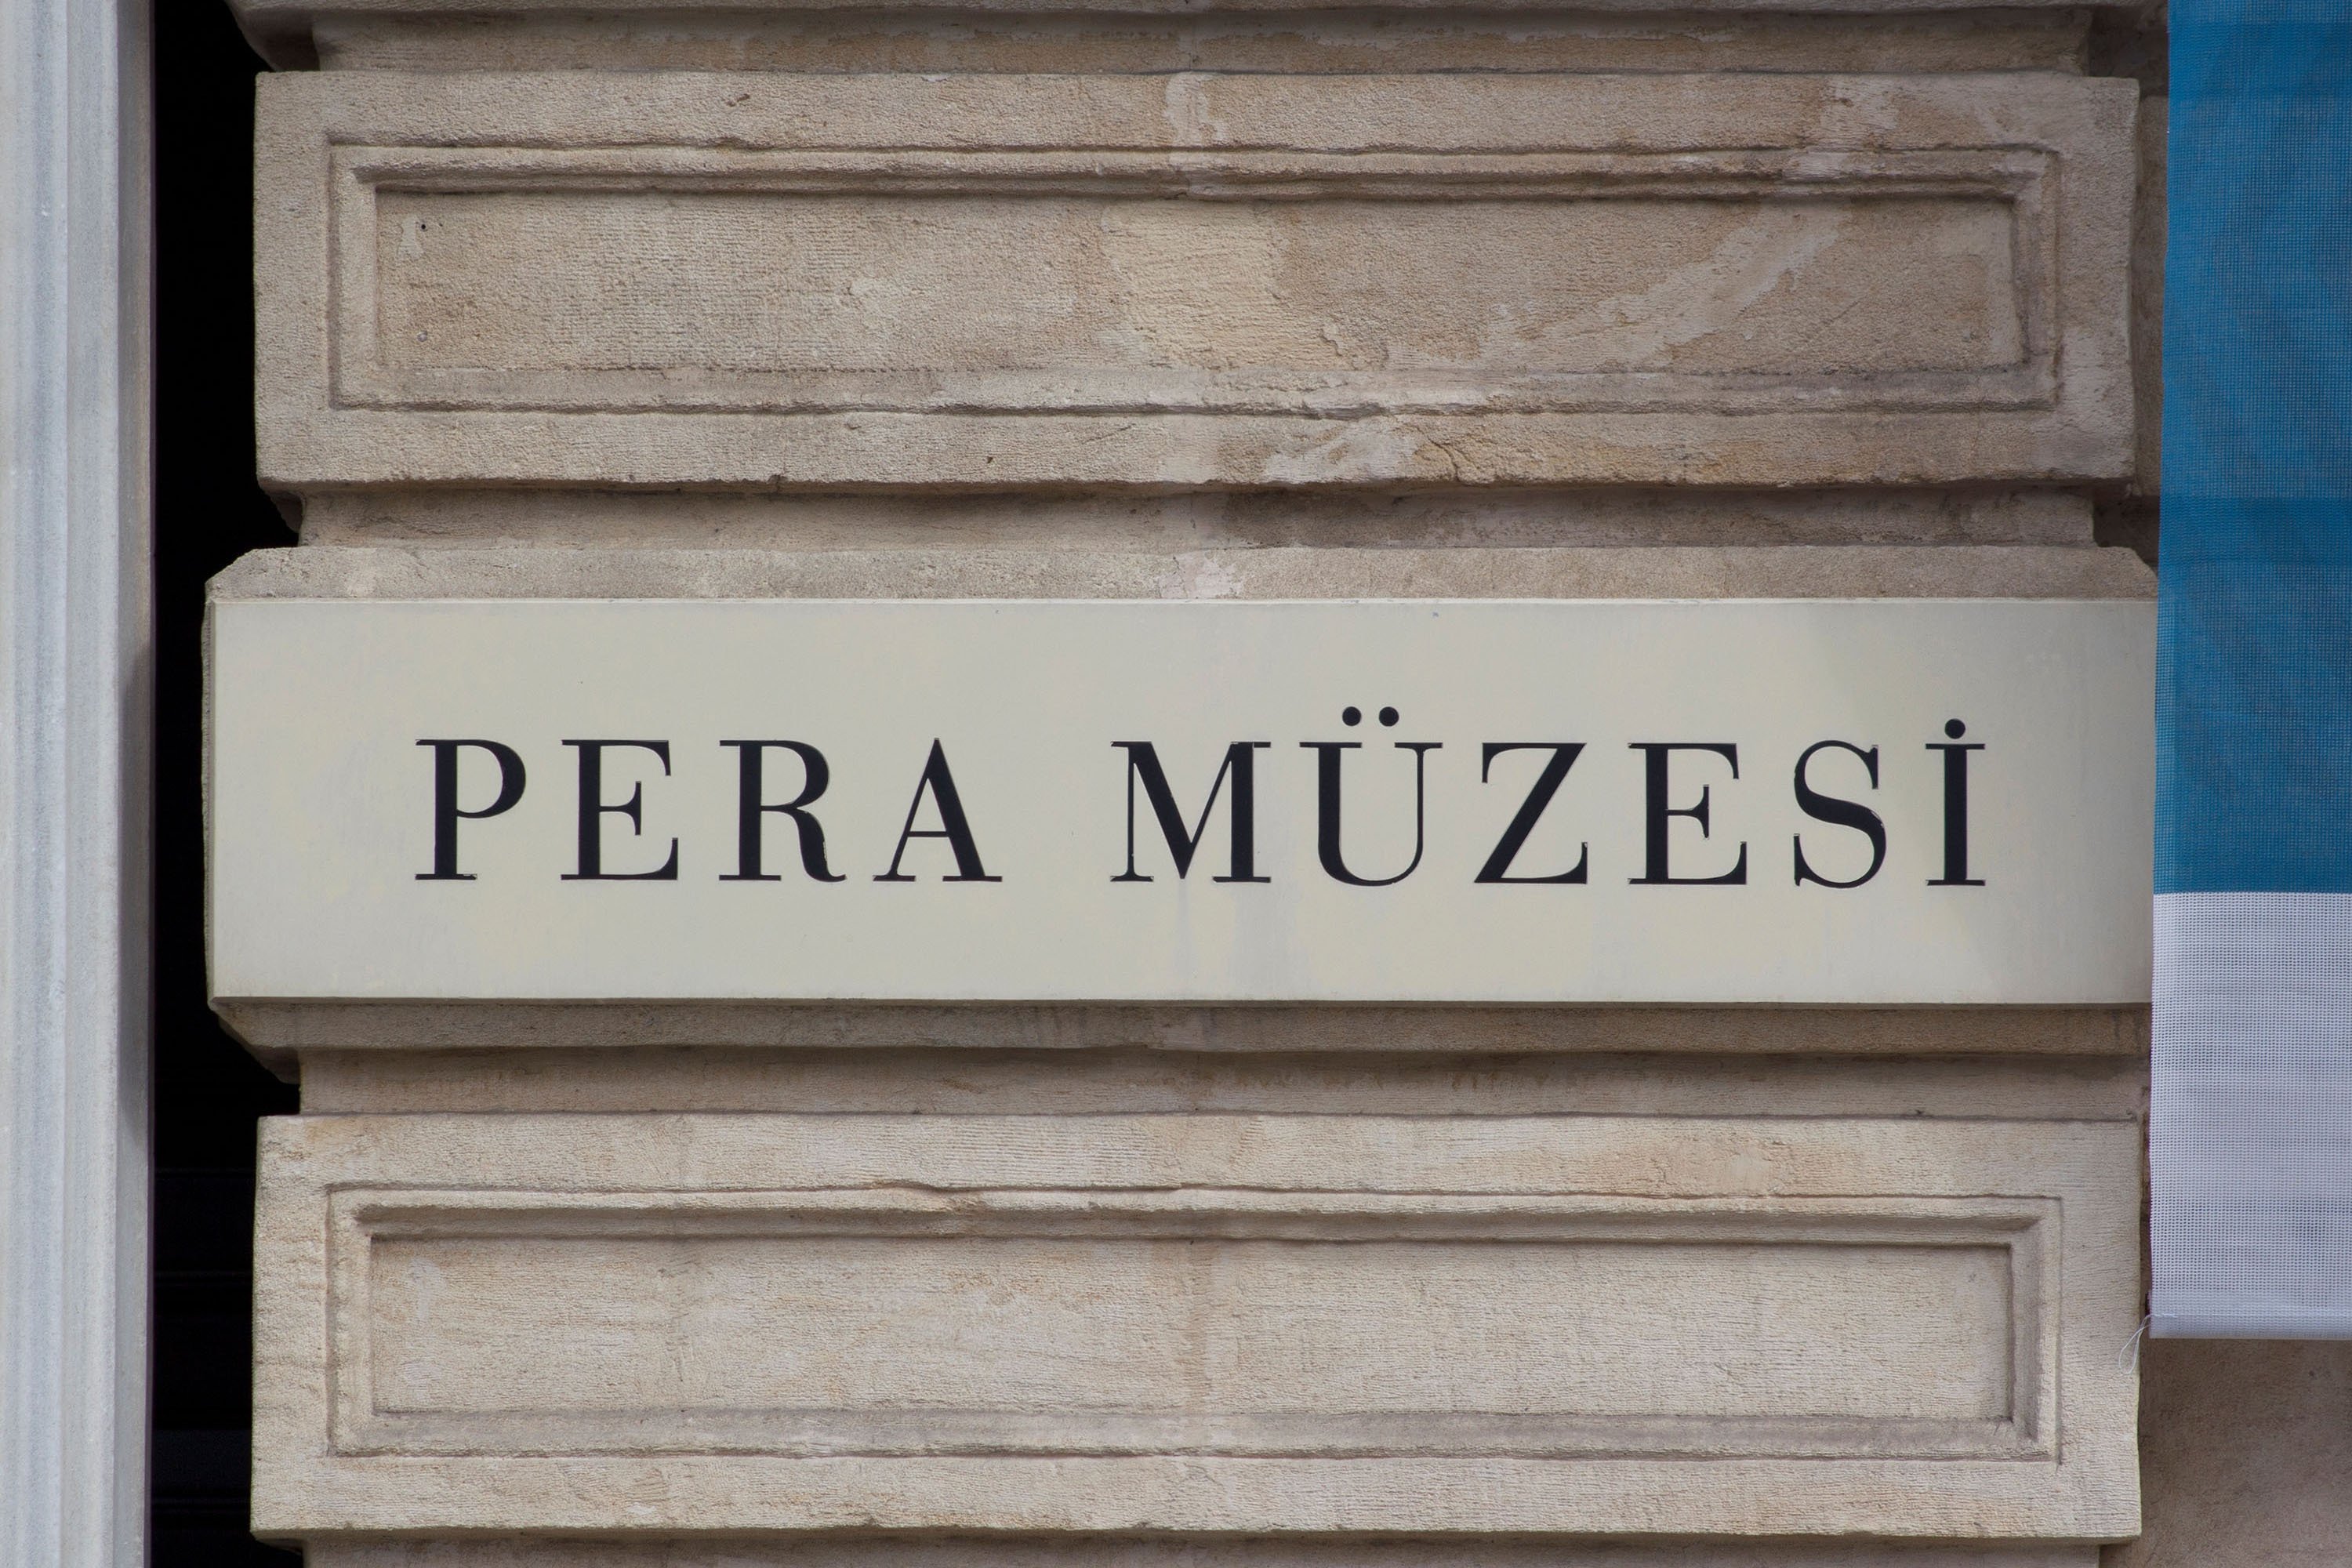 The sign at the entrance of Pera Museum in Beyoğlu, Istanbul, Turkey, Sept. 6, 2021. (Shutterstock Photo)